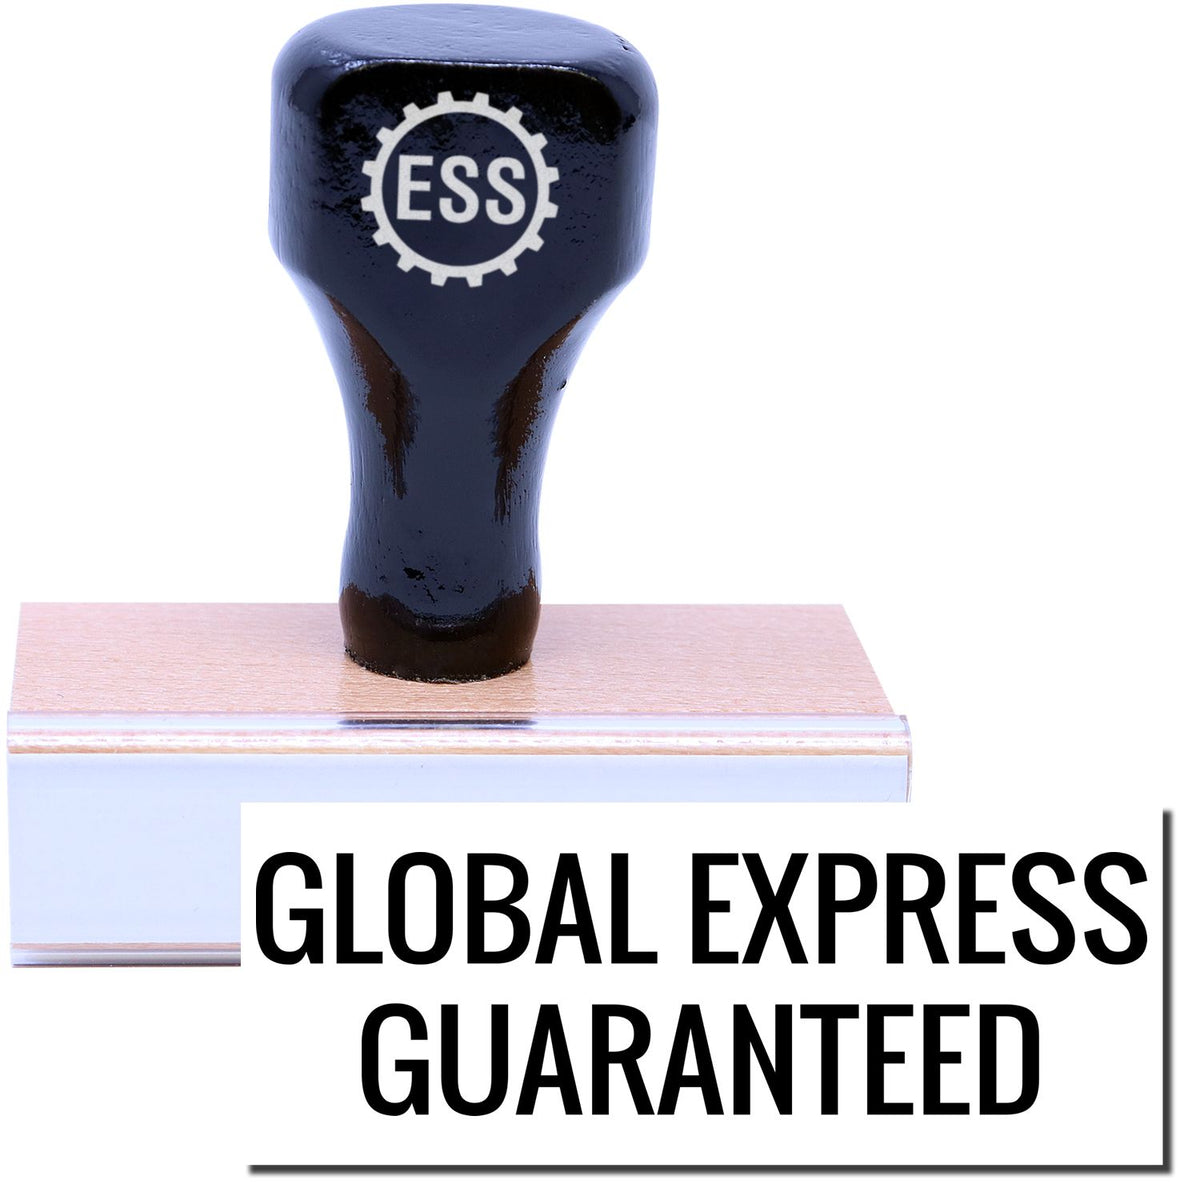 A stock office rubber stamp with a stamped image showing how the text &quot;GLOBAL EXPRESS GUARANTEED&quot; is displayed after stamping.